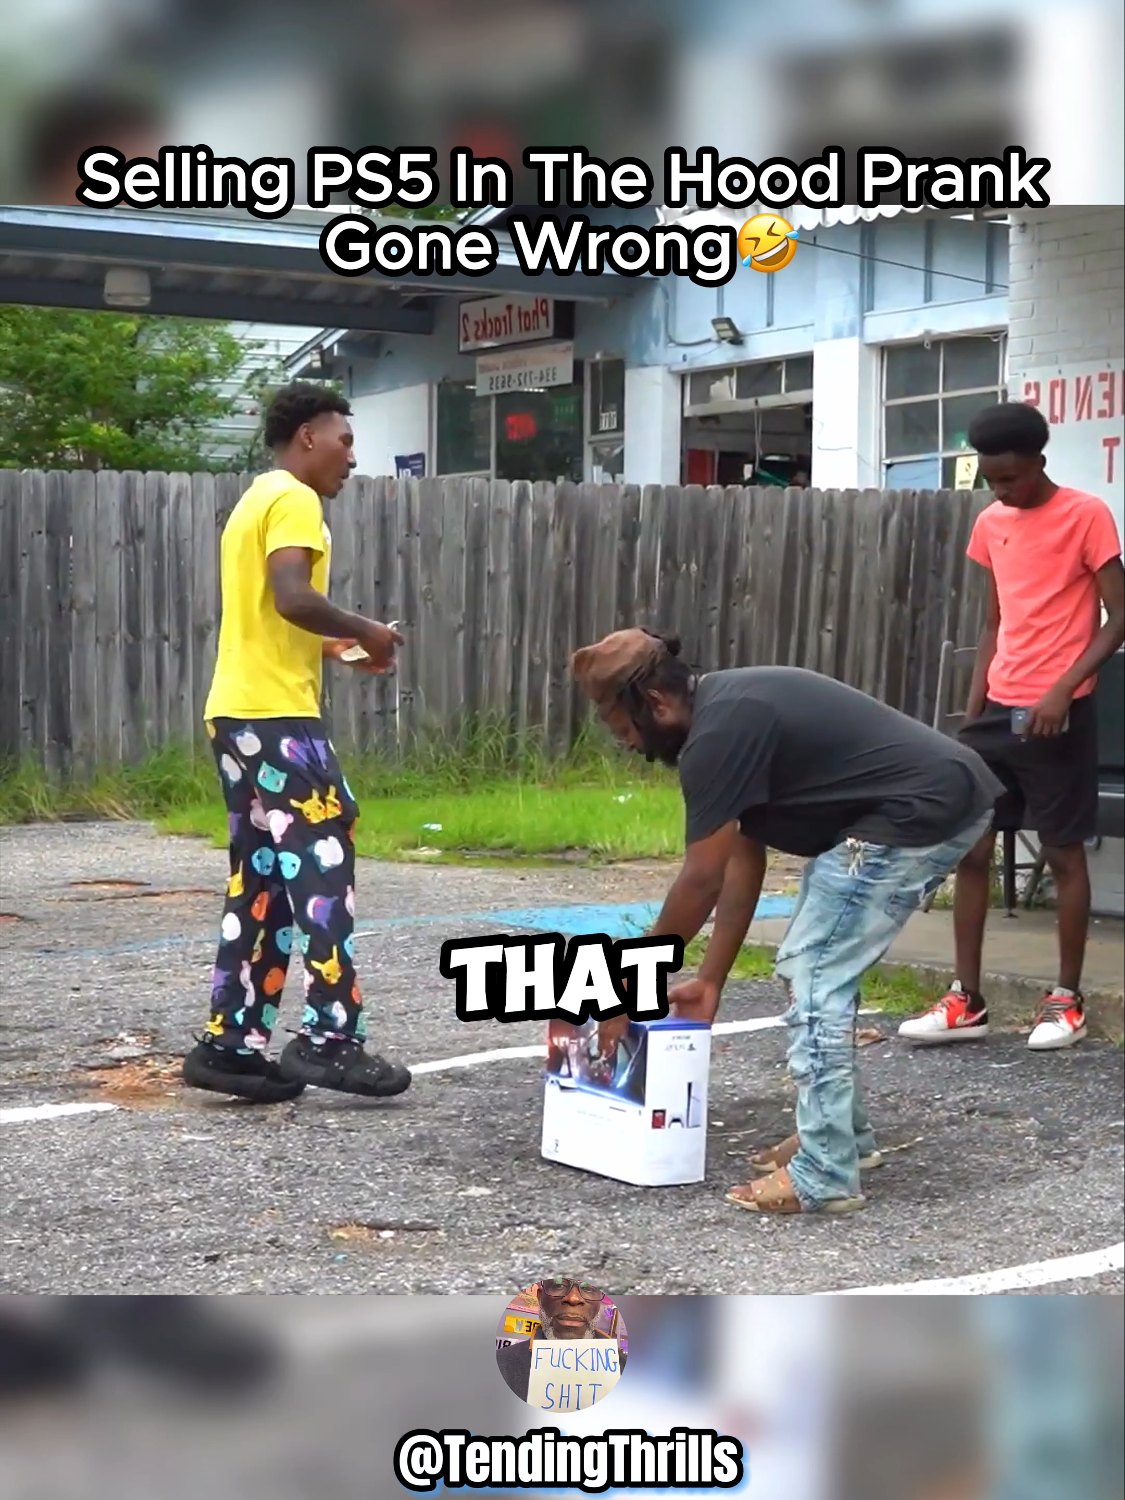 (Part 7) Selling PS5 In The Hood Prank Gone Wrong🤣 YT: KeyCourage @keycourage#prank #ps5 #PS #playstation #playstation5 #Funny #fyp #foryoupage #foryou #trending #viral #hood #hoodprank #hoodpranks #ghetto #gonewrong #ps5prank #money